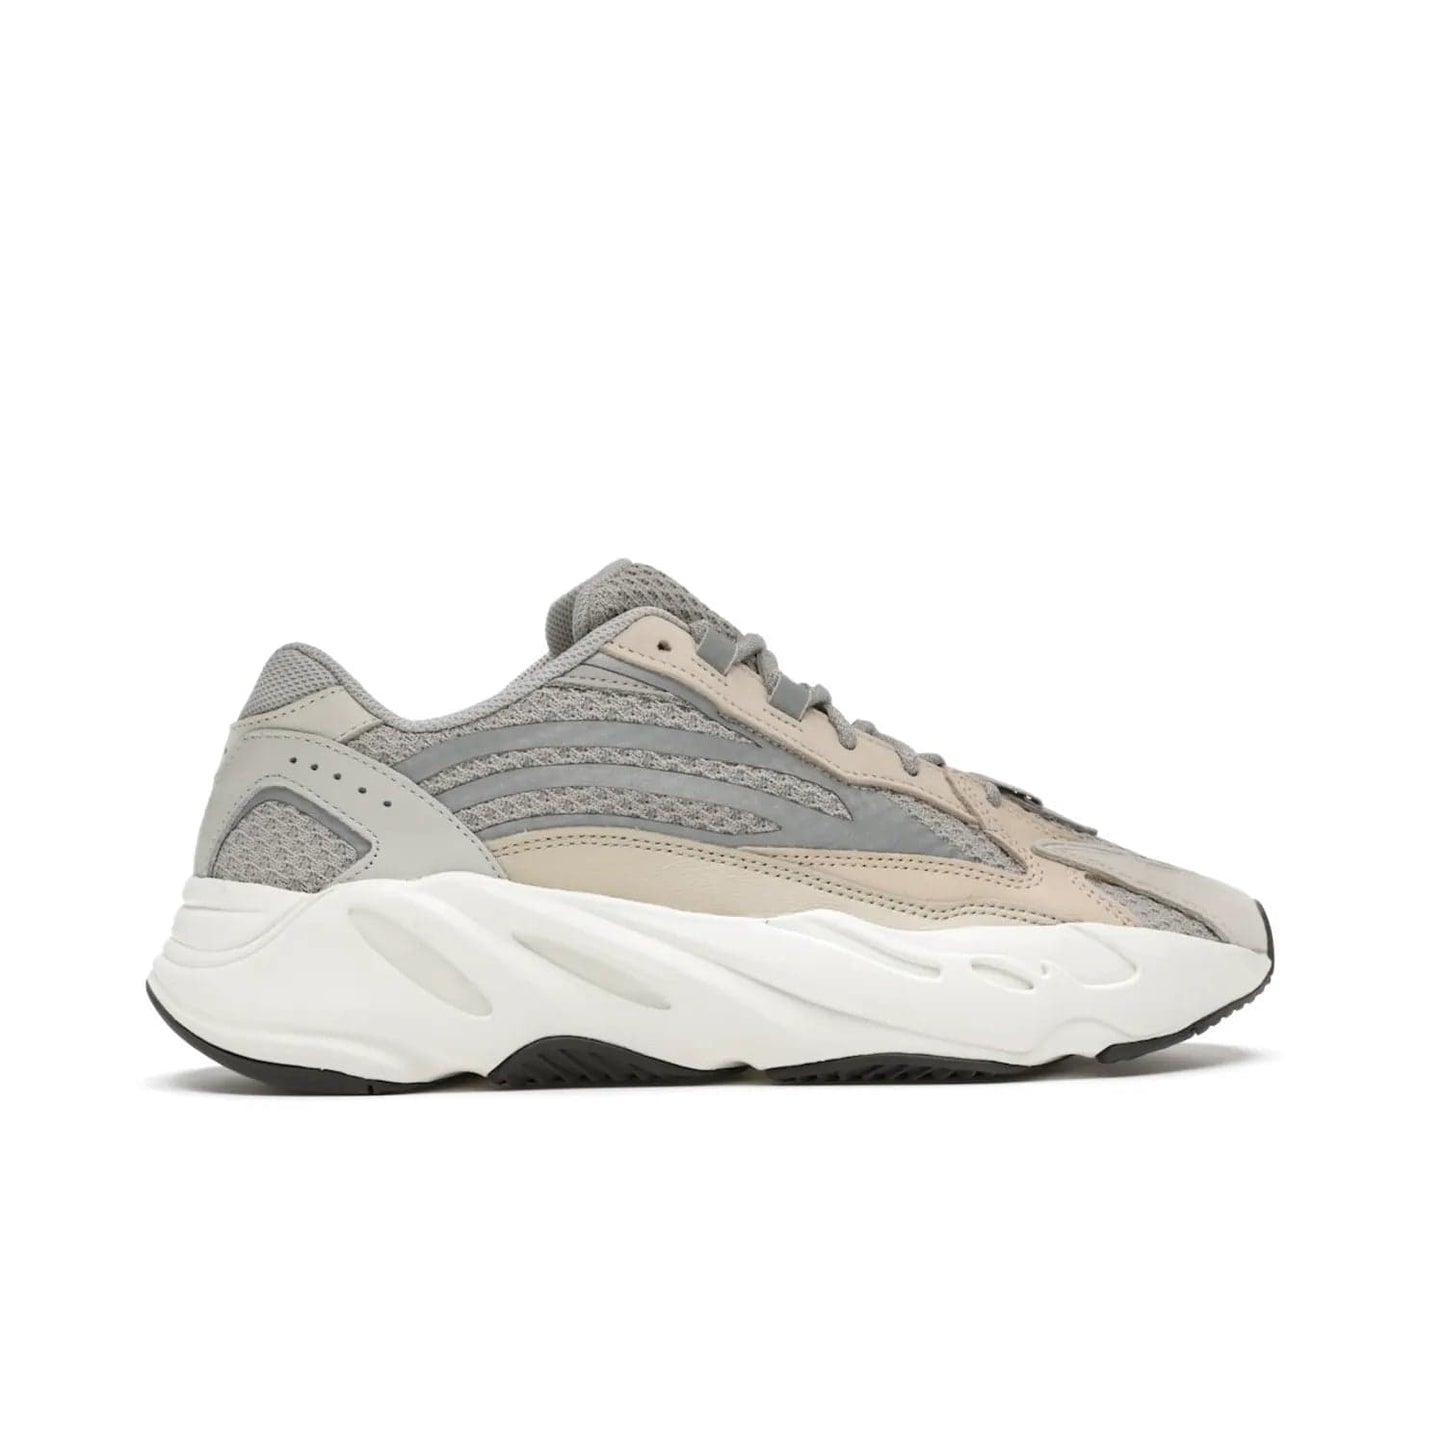 adidas Yeezy Boost 700 V2 Cream - Image 36 - Only at www.BallersClubKickz.com - Add style and luxury to your wardrobe with the adidas Yeezy 700 V2 Cream. Featuring a unique reflective upper, leather overlays, mesh underlays and the signature BOOST midsole, this silhouette is perfect for any stylish wardrobe.